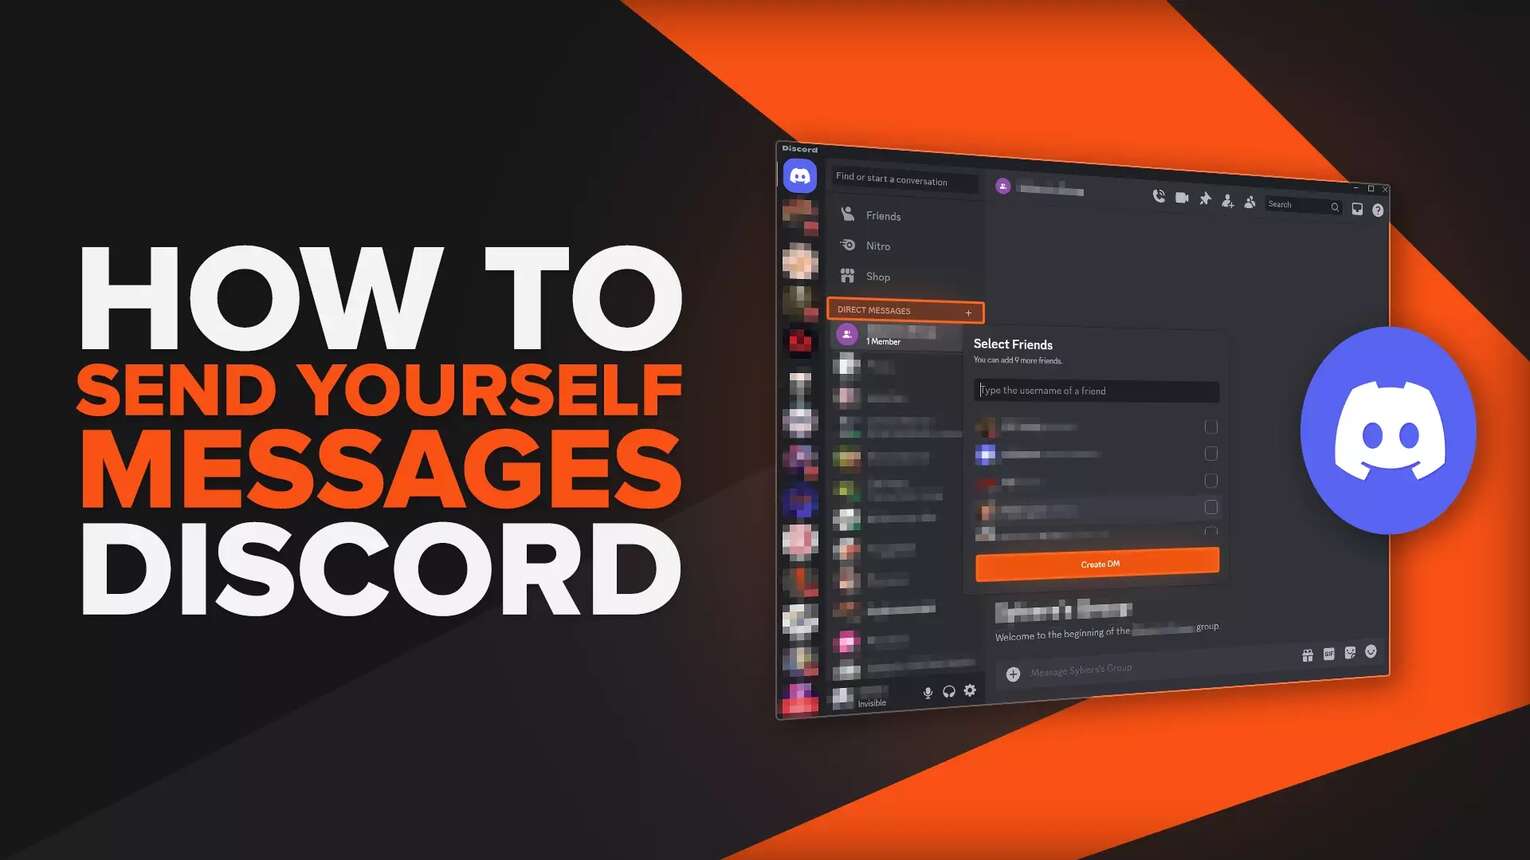 How To Send A Message To Yourself On Discord? [2 Methods]